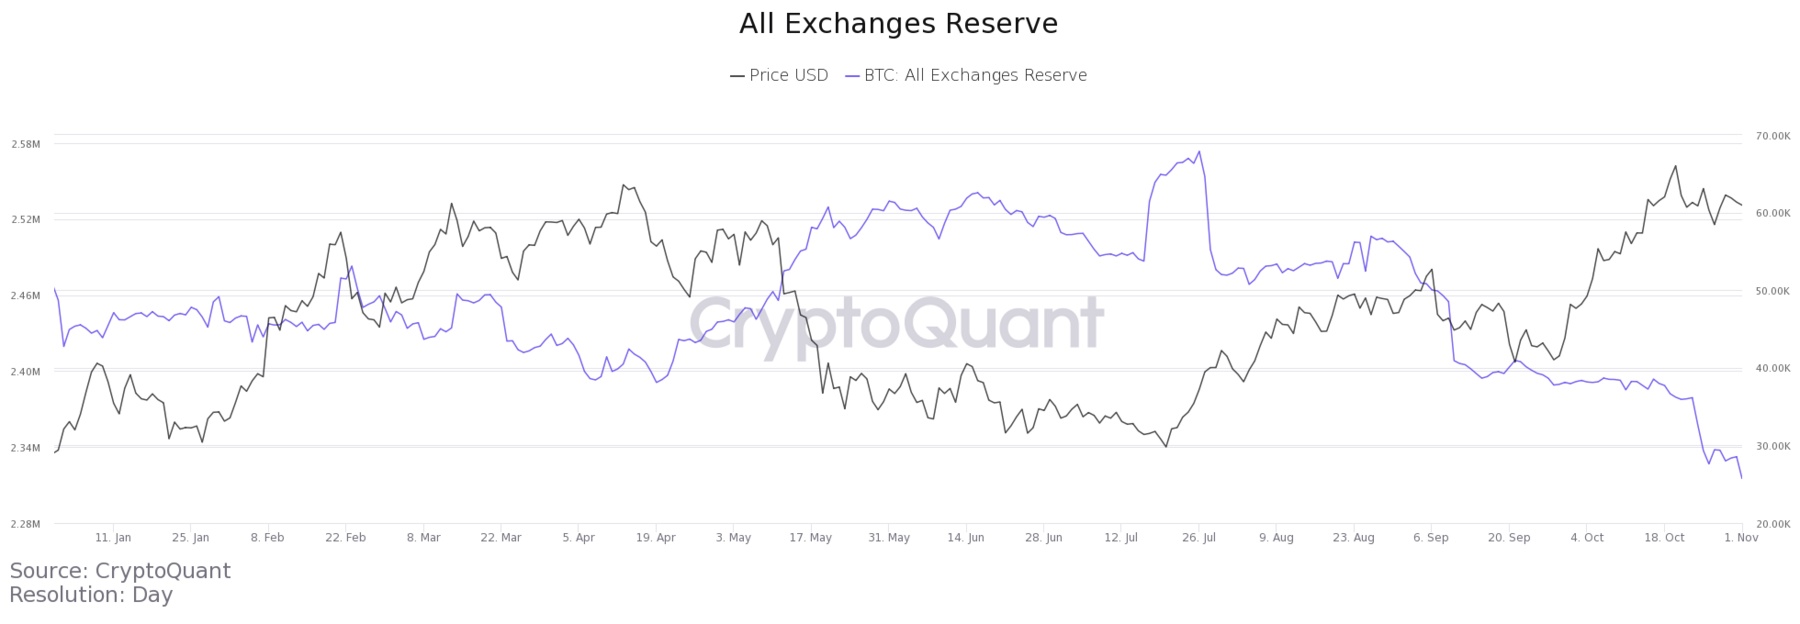 All exchange reseserve